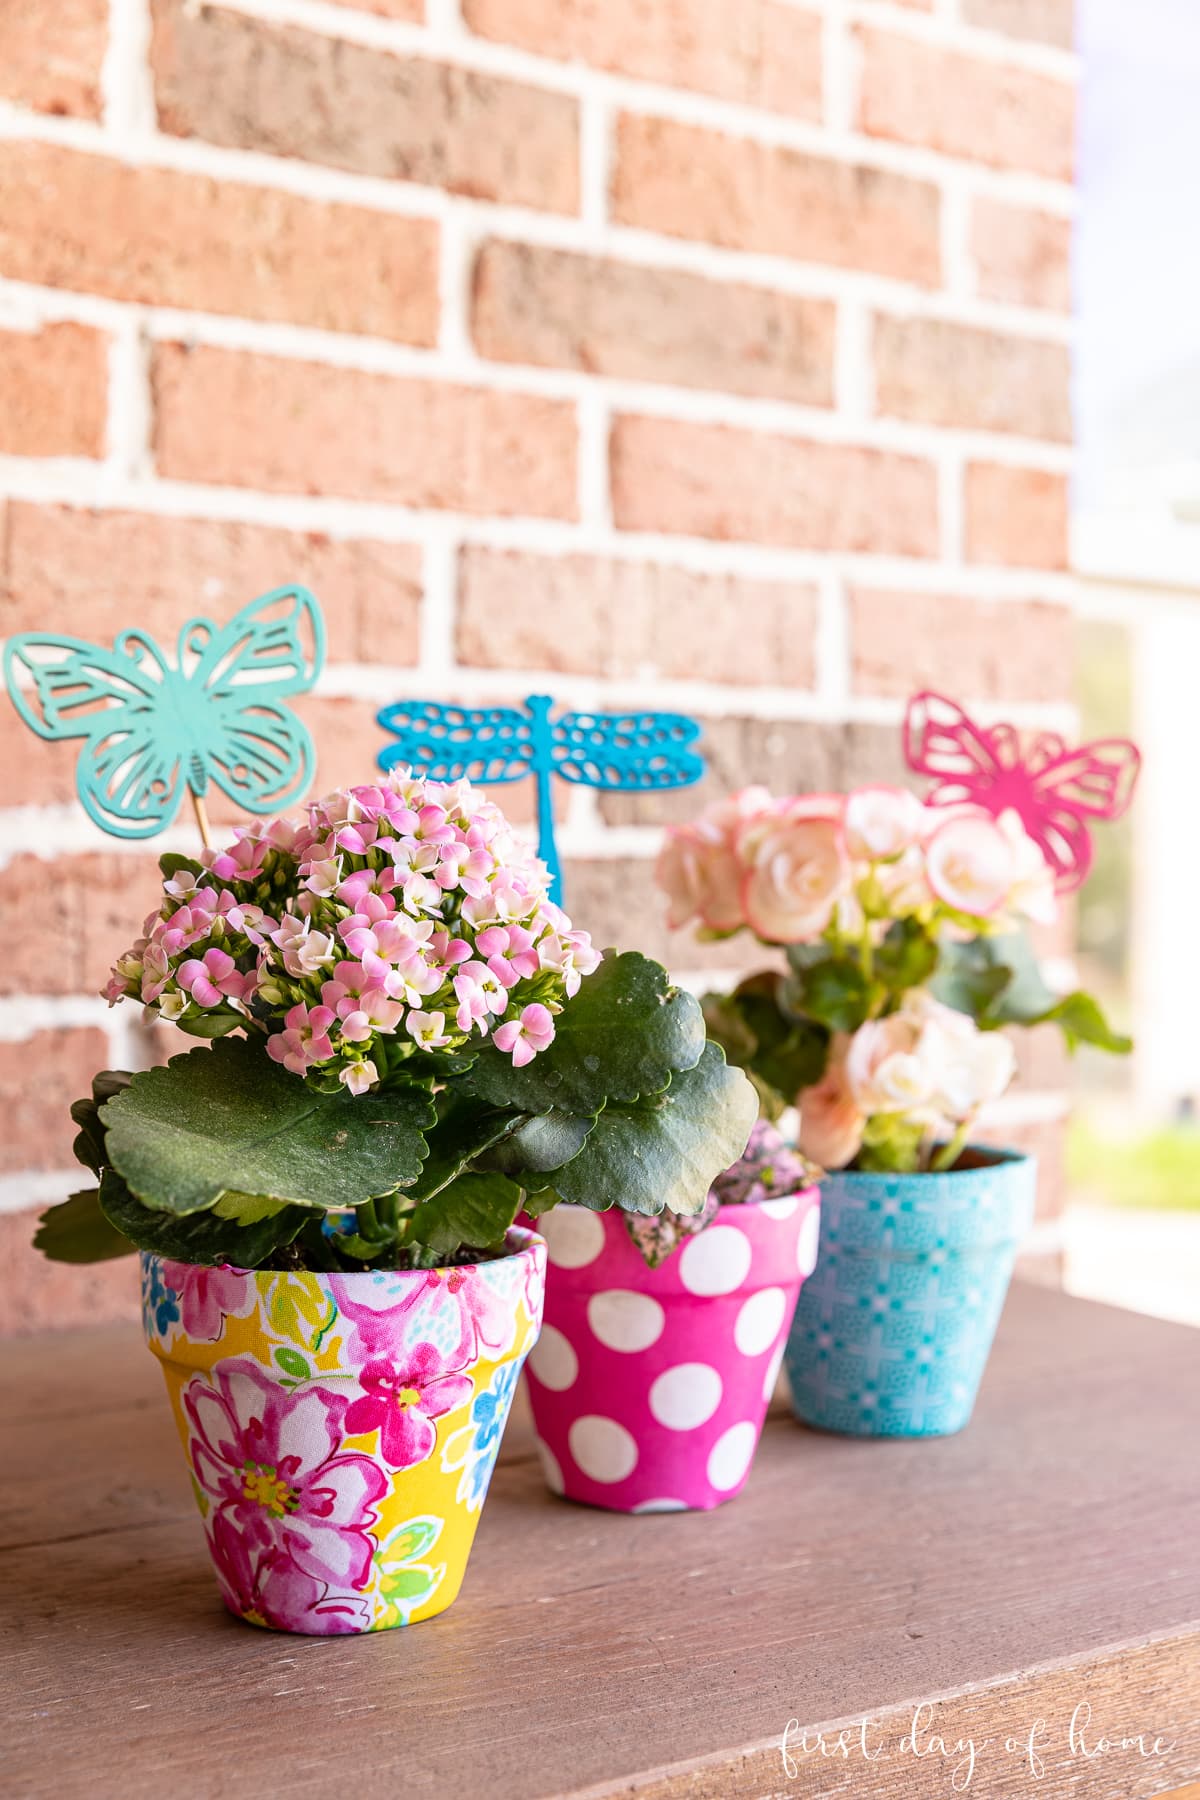 Trio of fabric covered flower pots with various spring flowers and DIY garden stakes